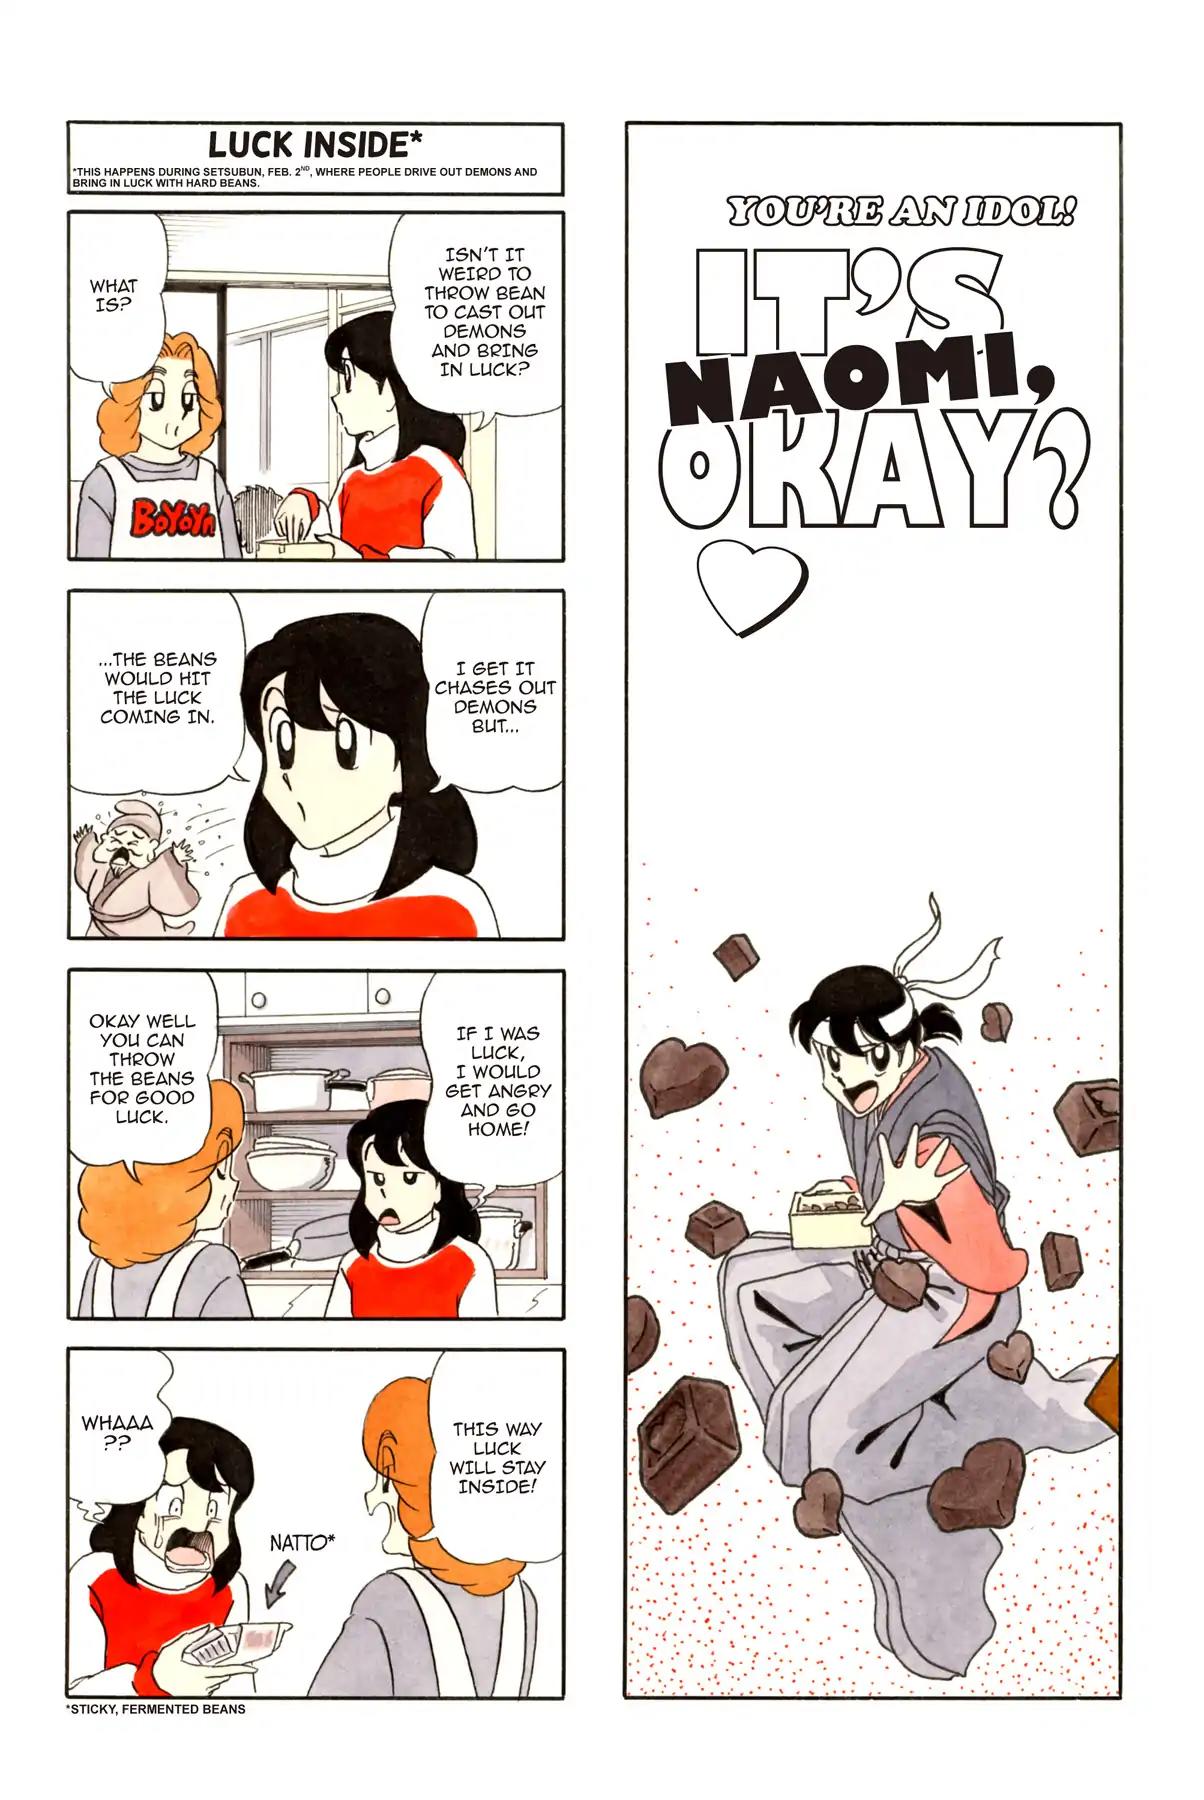 It's Naomi, Okay? After 16 Vol 1 Chapter 26